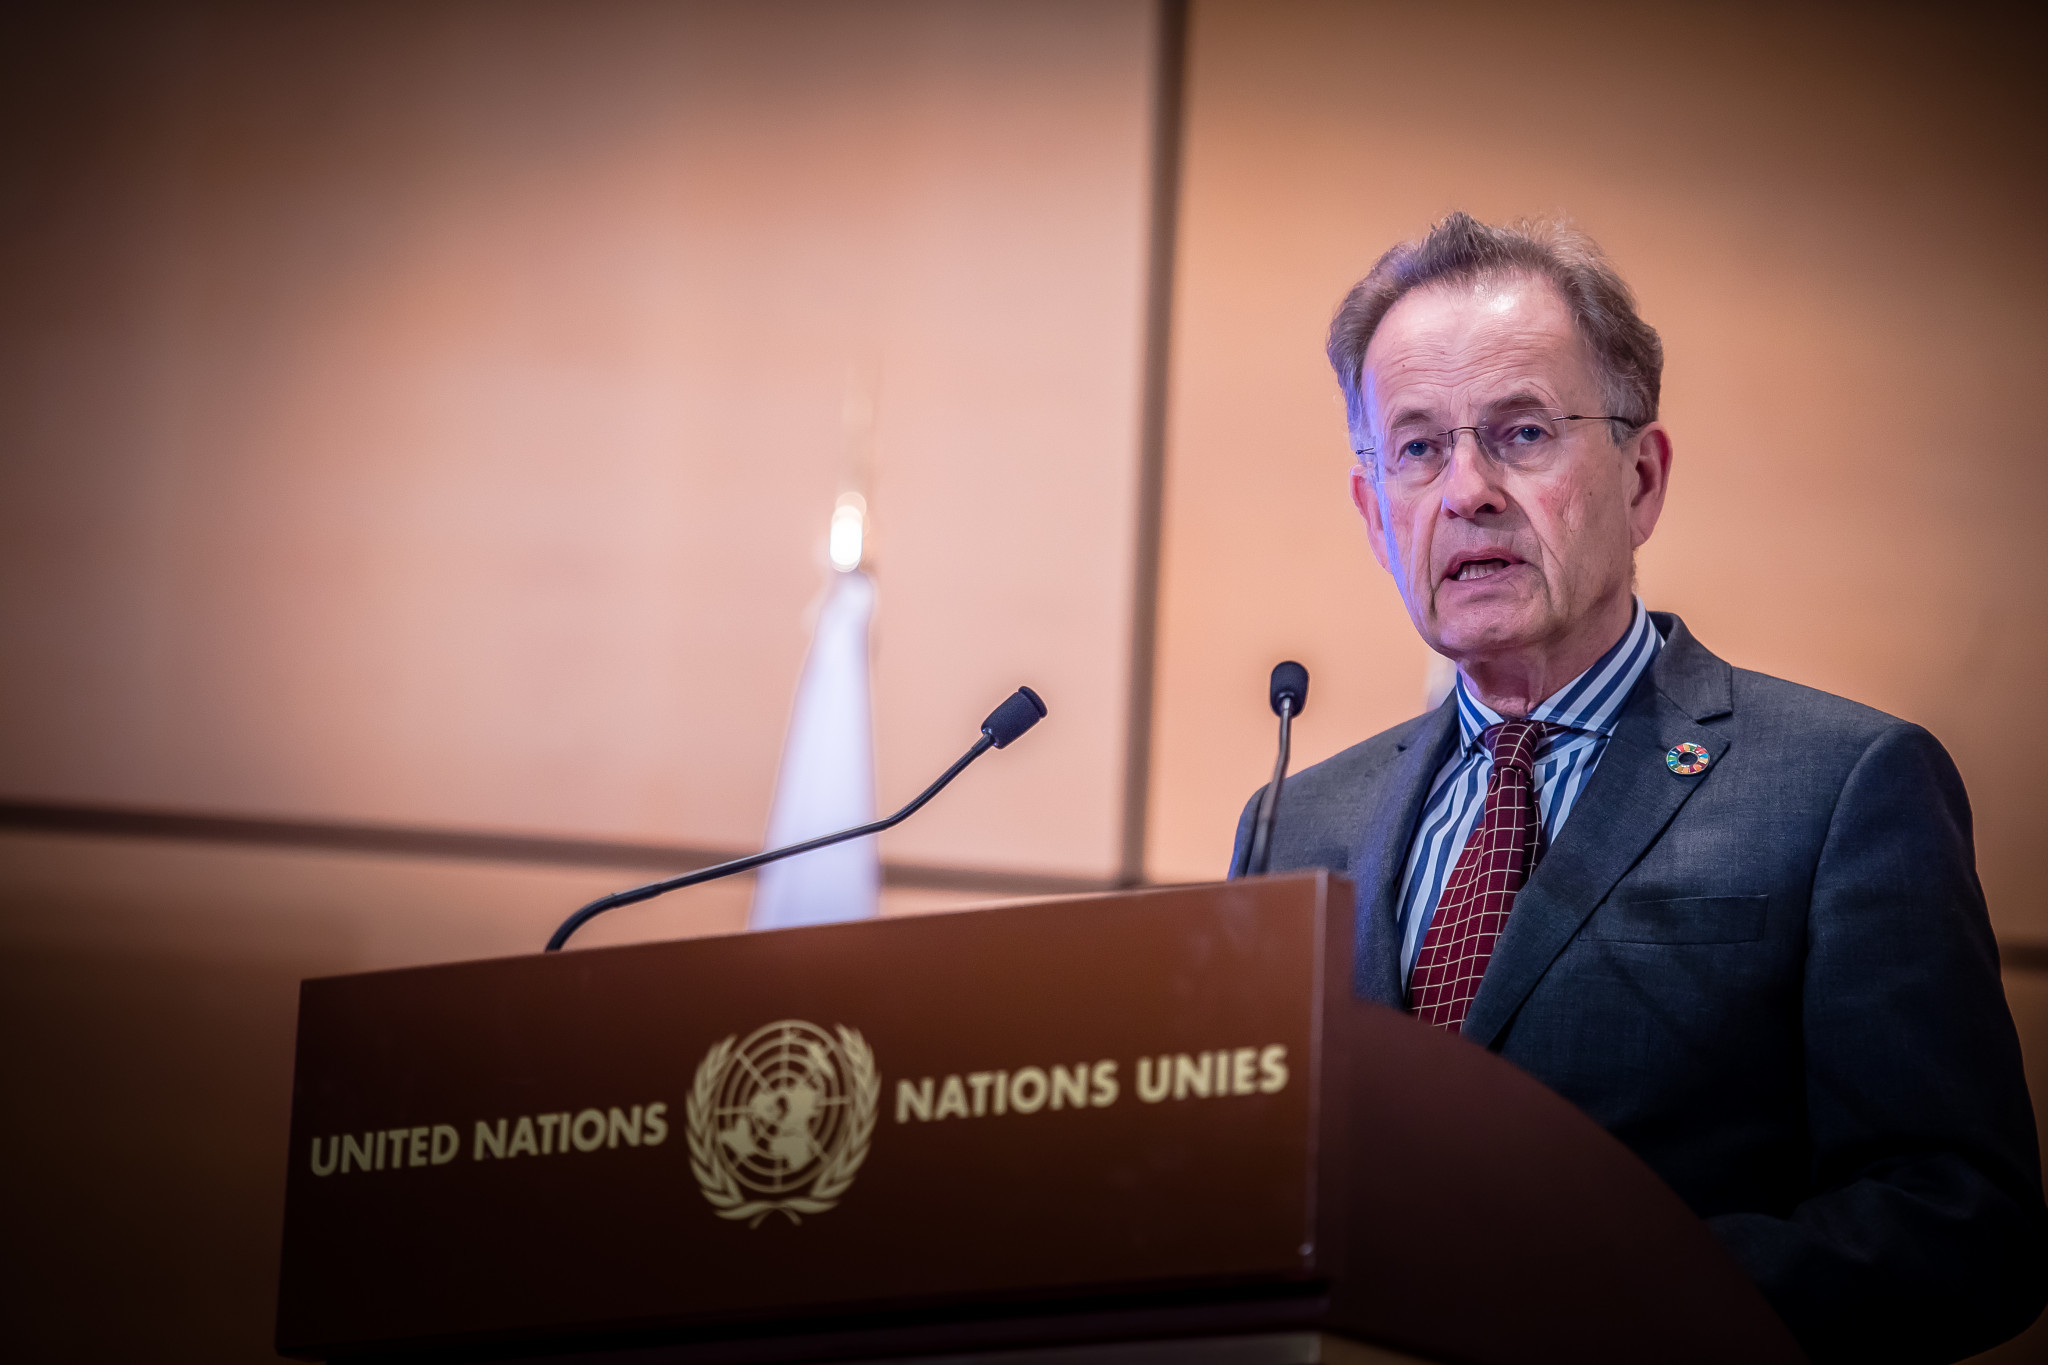 United Nations Geneva director general Michael Moller gave a welcoming speech at the joint demonstration at the United Nations Office at Geneva ©World Taekwondo